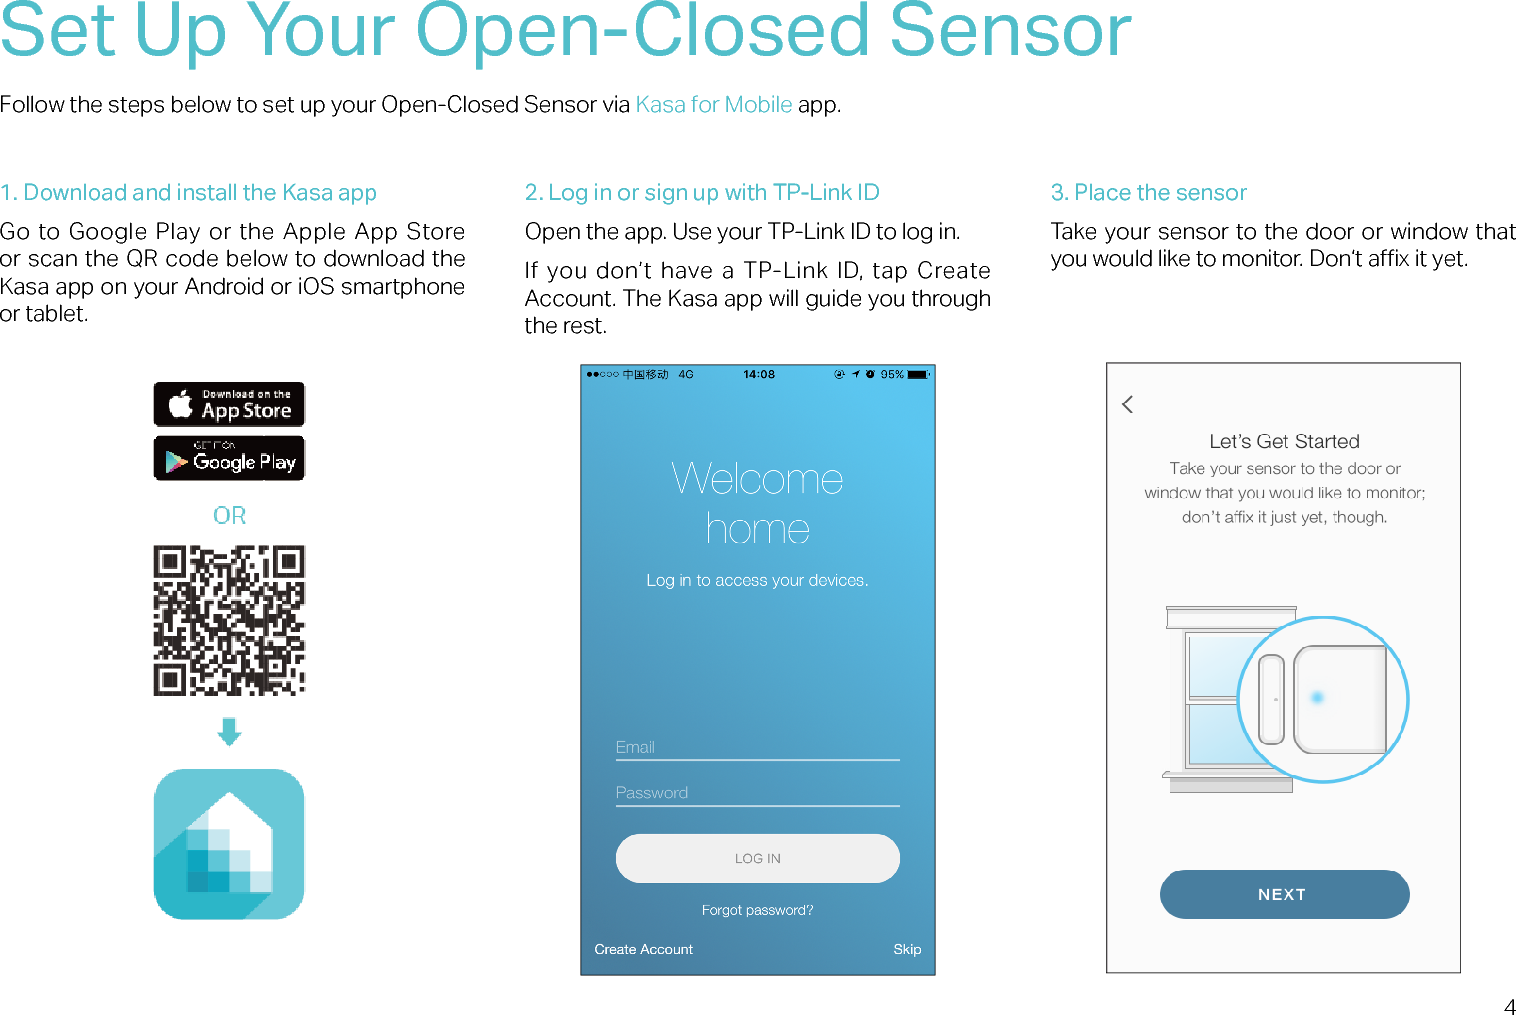 4Set Up Your Open-Closed SensorFollow the steps below to set up your Open-Closed Sensor via Kasa for Mobile app.1. Download and install the Kasa appGo to Google Play or the Apple App Store or scan the QR code below to download the Kasa app on your Android or iOS smartphone or tablet.2. Log in or sign up with TP-Link IDOpen the app. Use your TP-Link ID to log in. If  you don’t  have a TP-Link ID,  tap  Create Account. The Kasa app will guide you through the rest.3. Place the sensorTake your sensor to the door or window that you would like to monitor. Don‘t ax it yet.